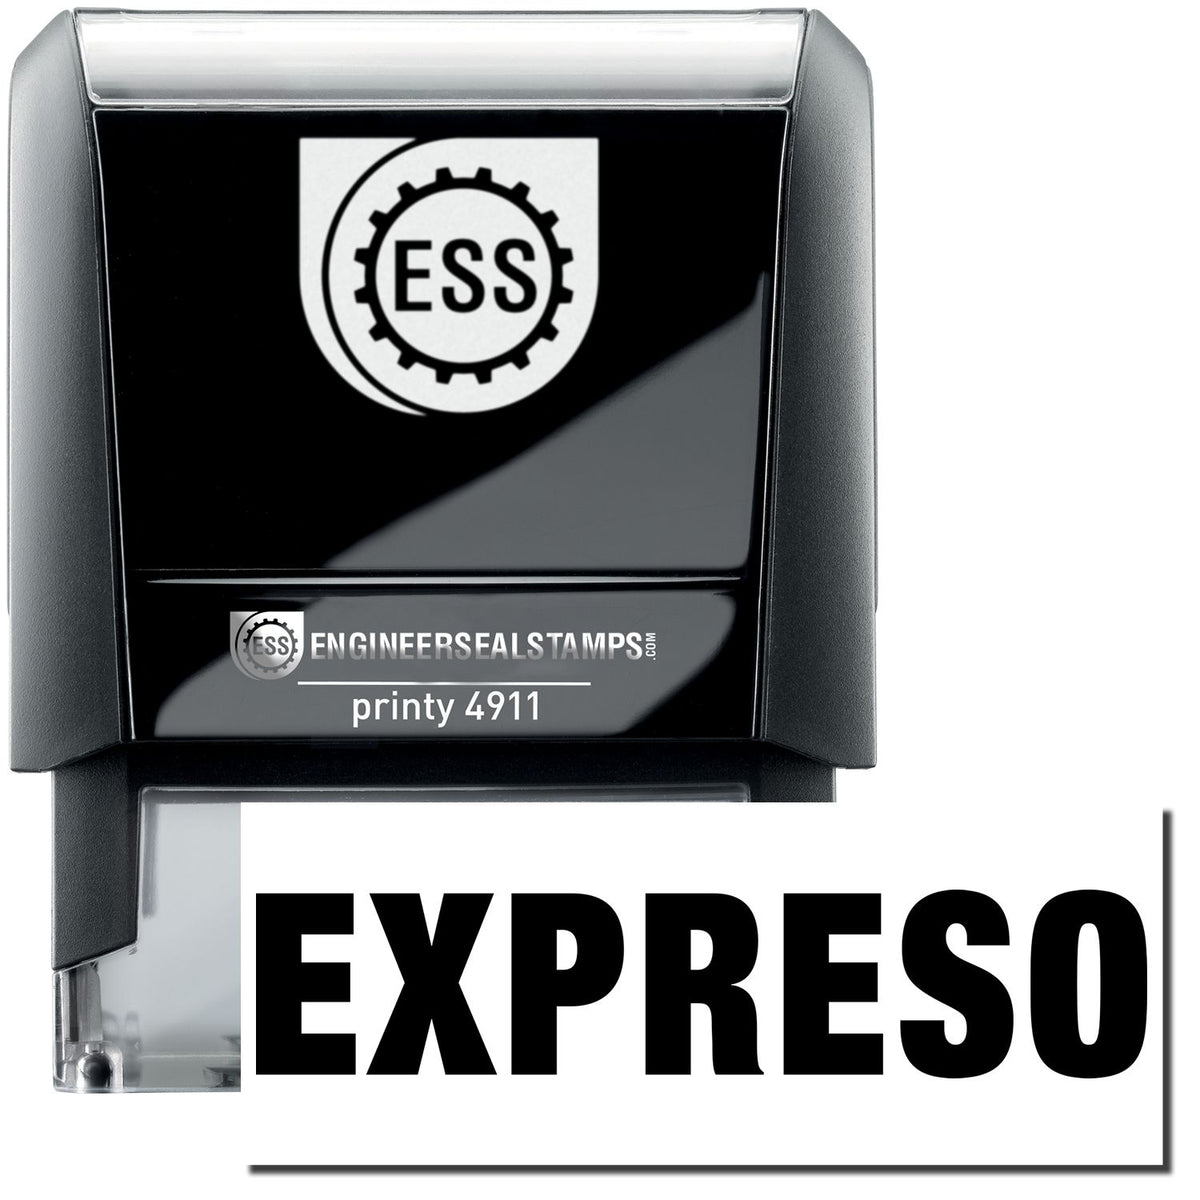 A self-inking stamp with a stamped image showing how the text &quot;EXPRESO&quot; is displayed after stamping.